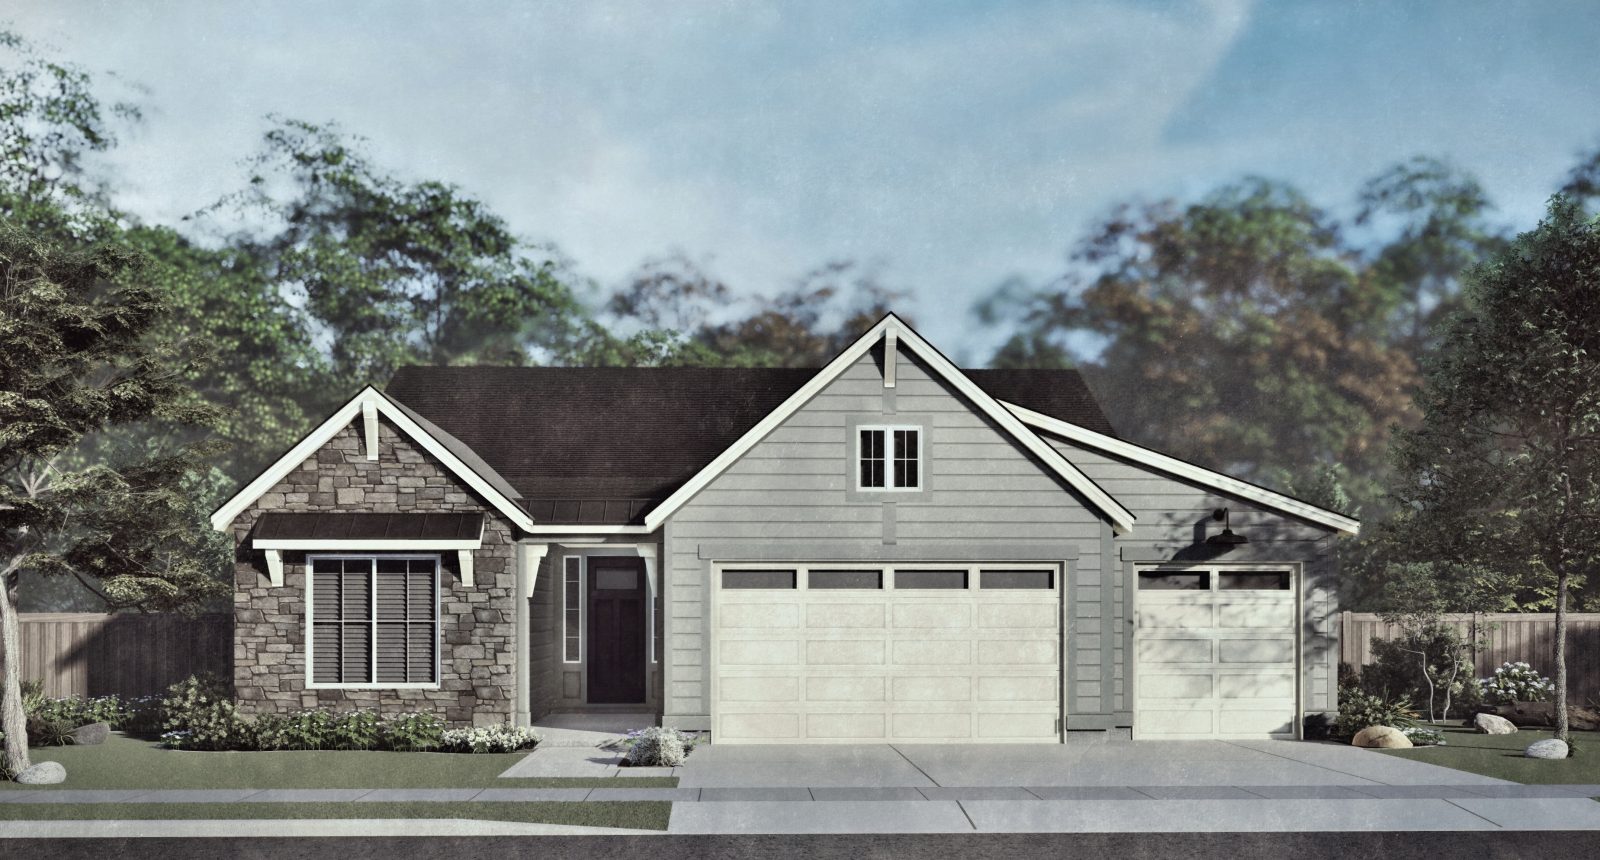 Centennial B - Single Story House Plans in Nampa ID